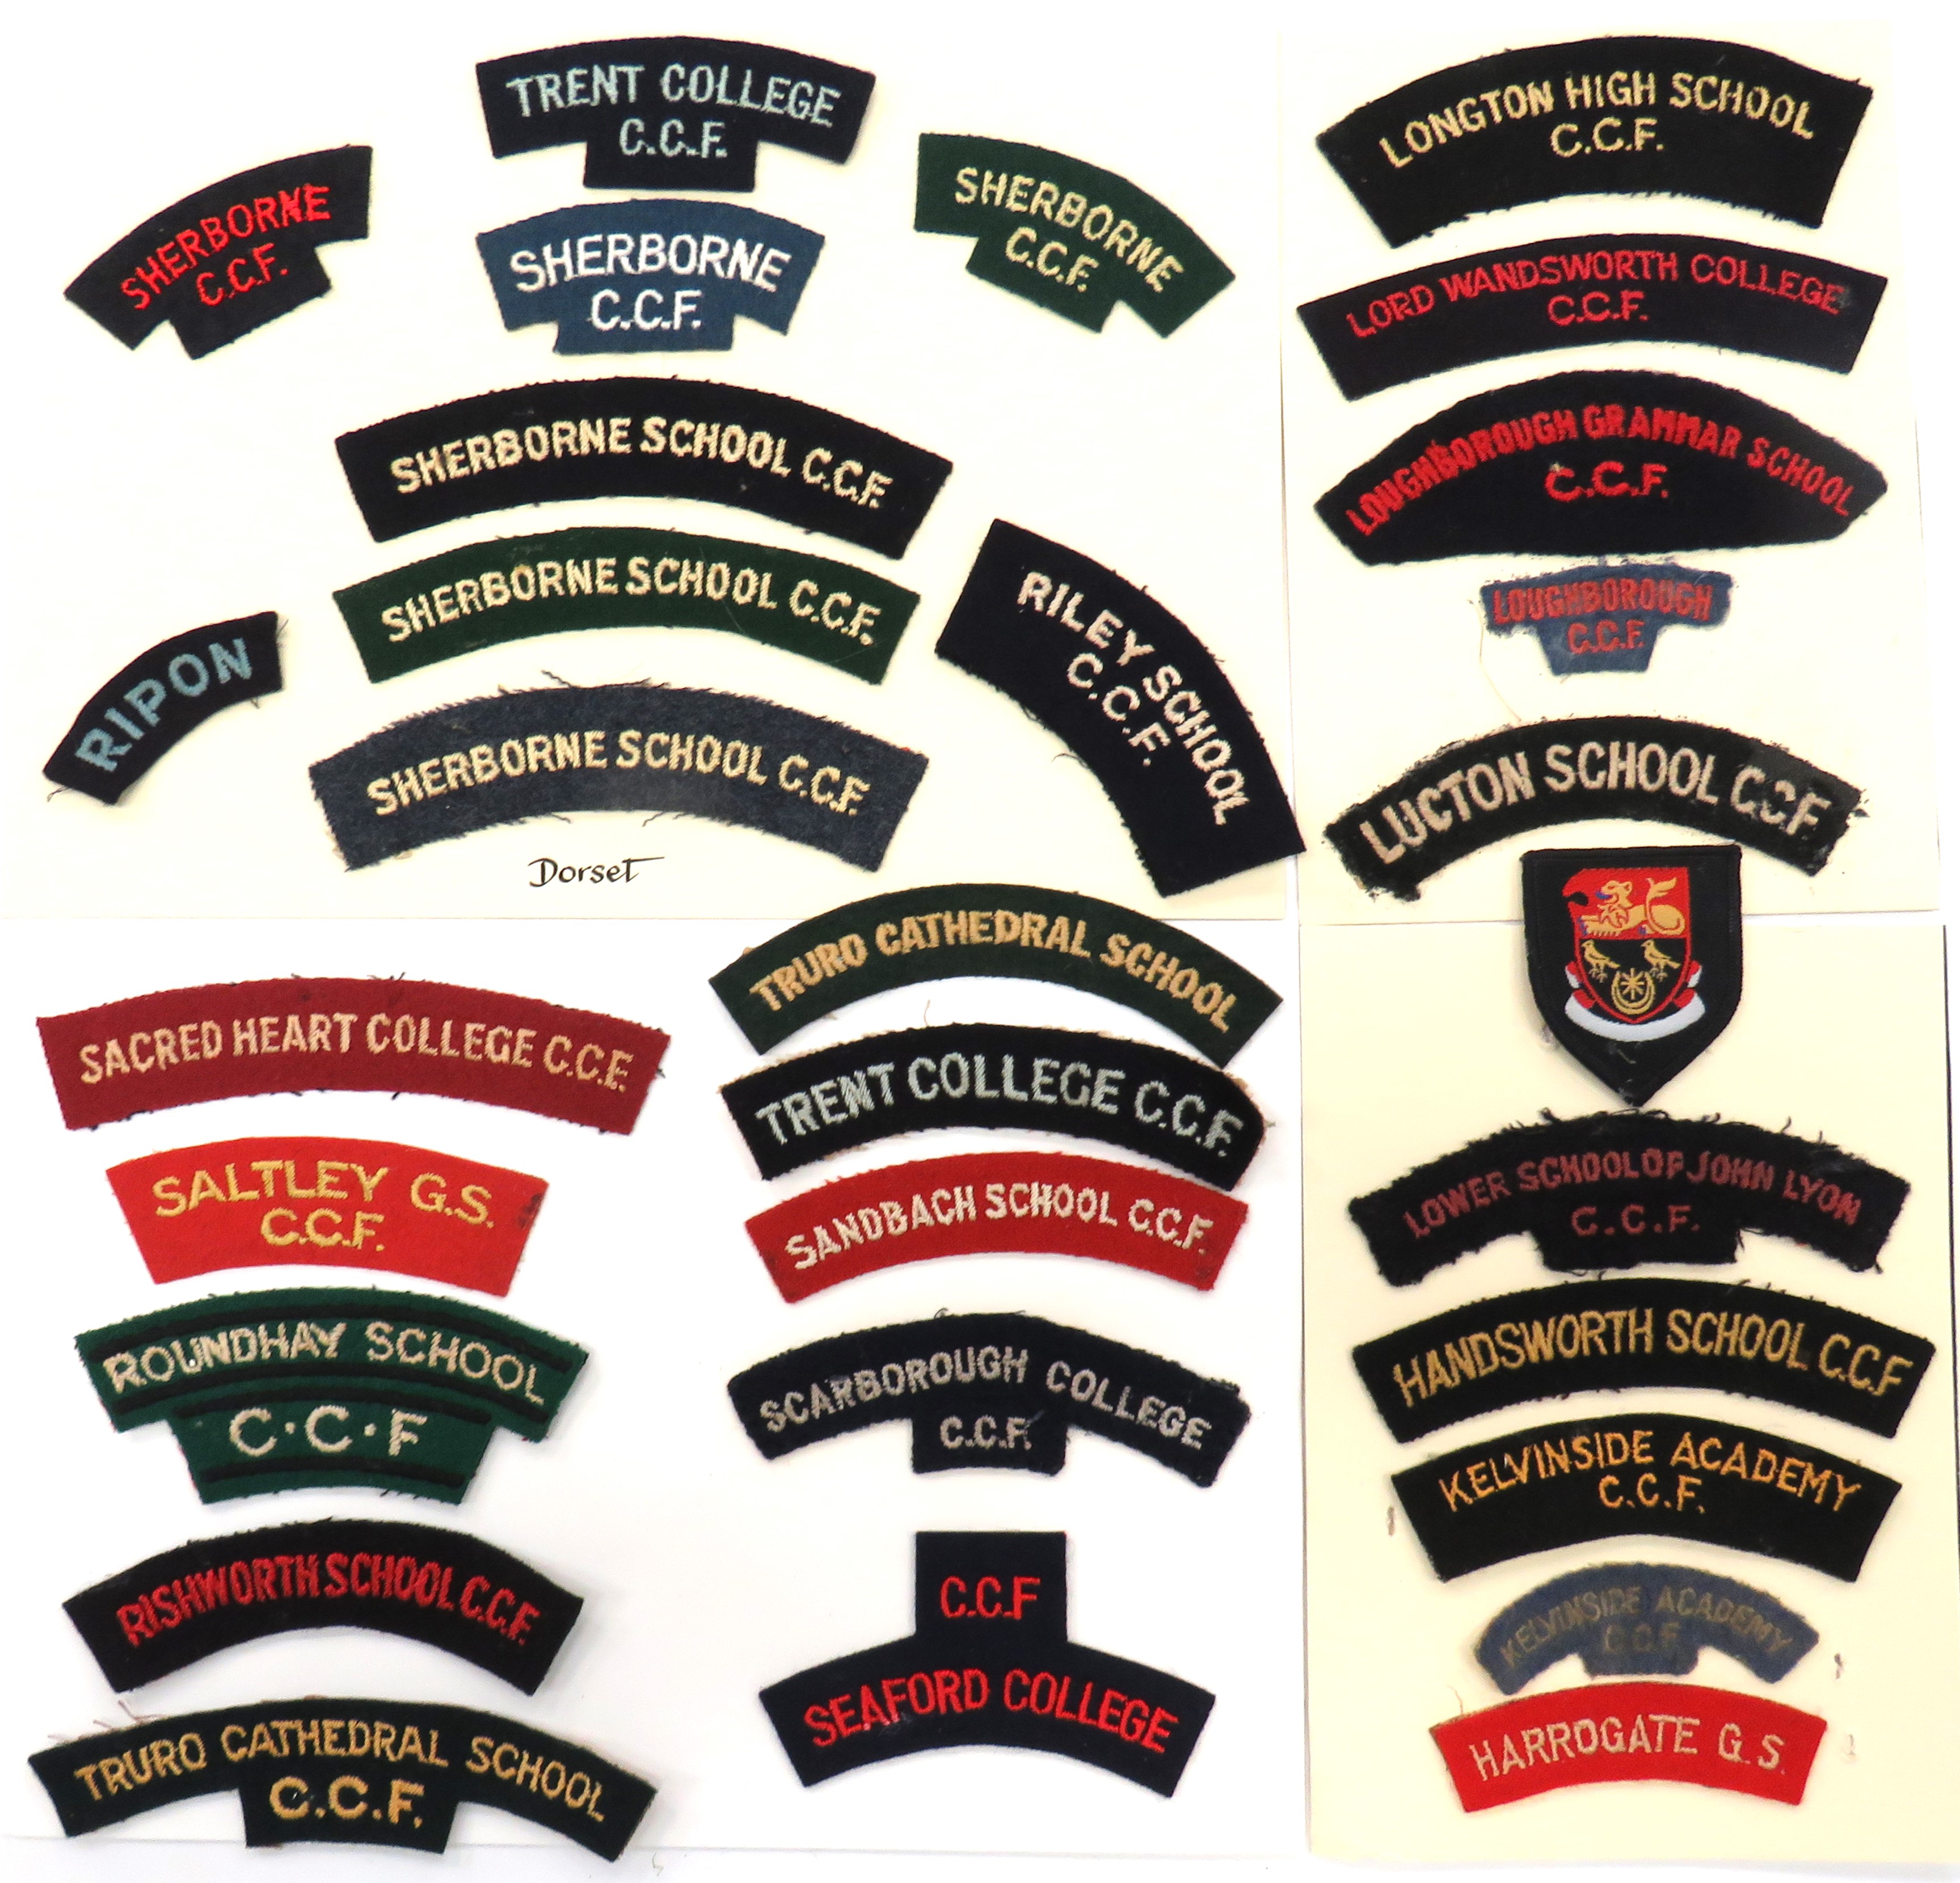 30 x Embroidery CCF Titles embroidery titles including Riley School CCF ... Ripon ... Roundhay